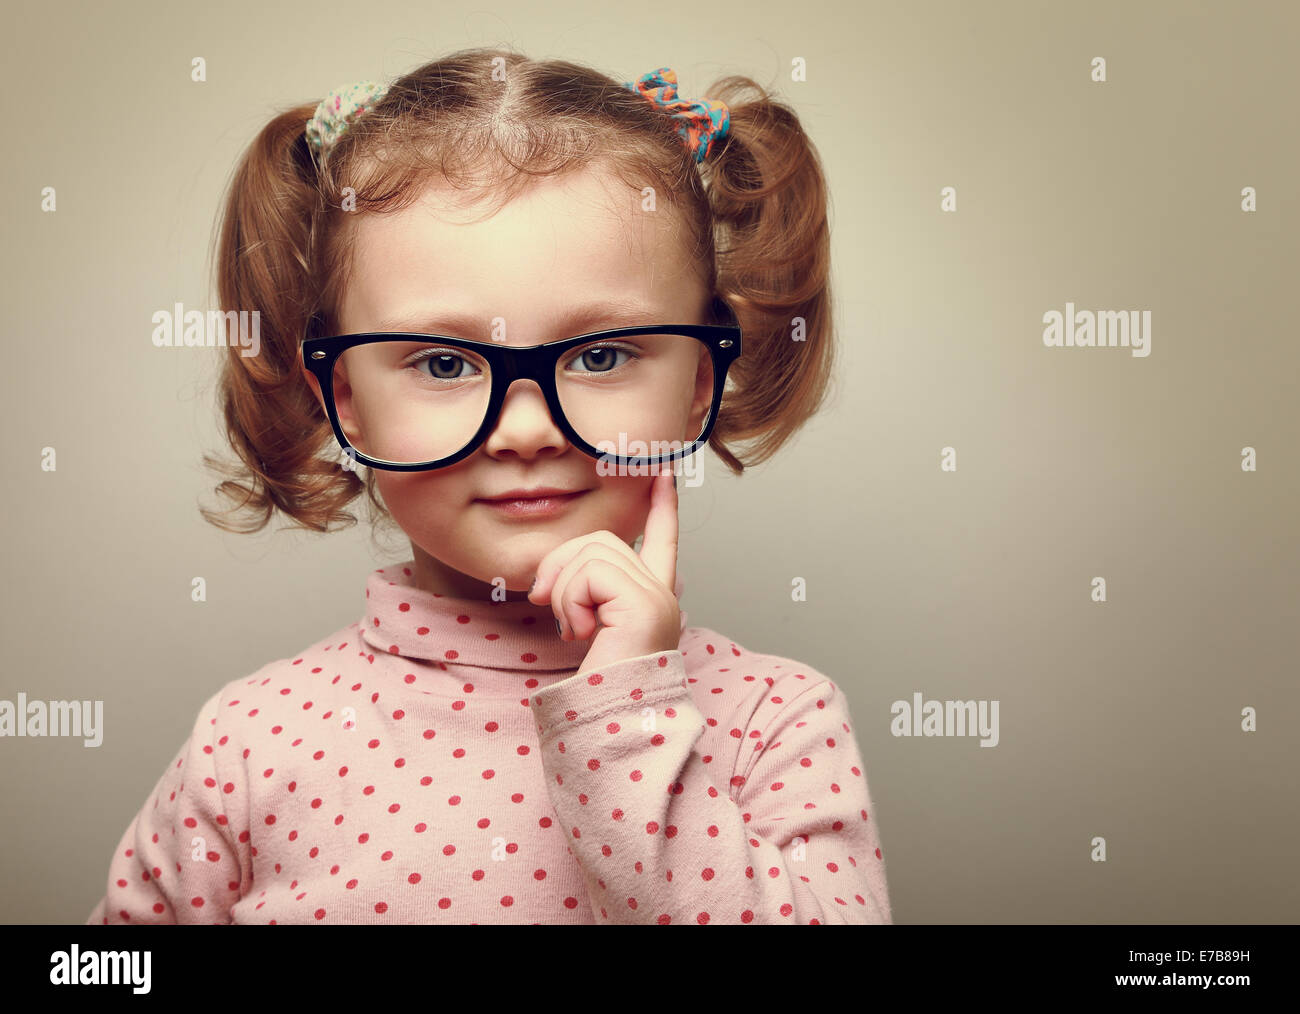 Thinking little kid girl looking happy in glasses. Vintage portrait Stock Photo